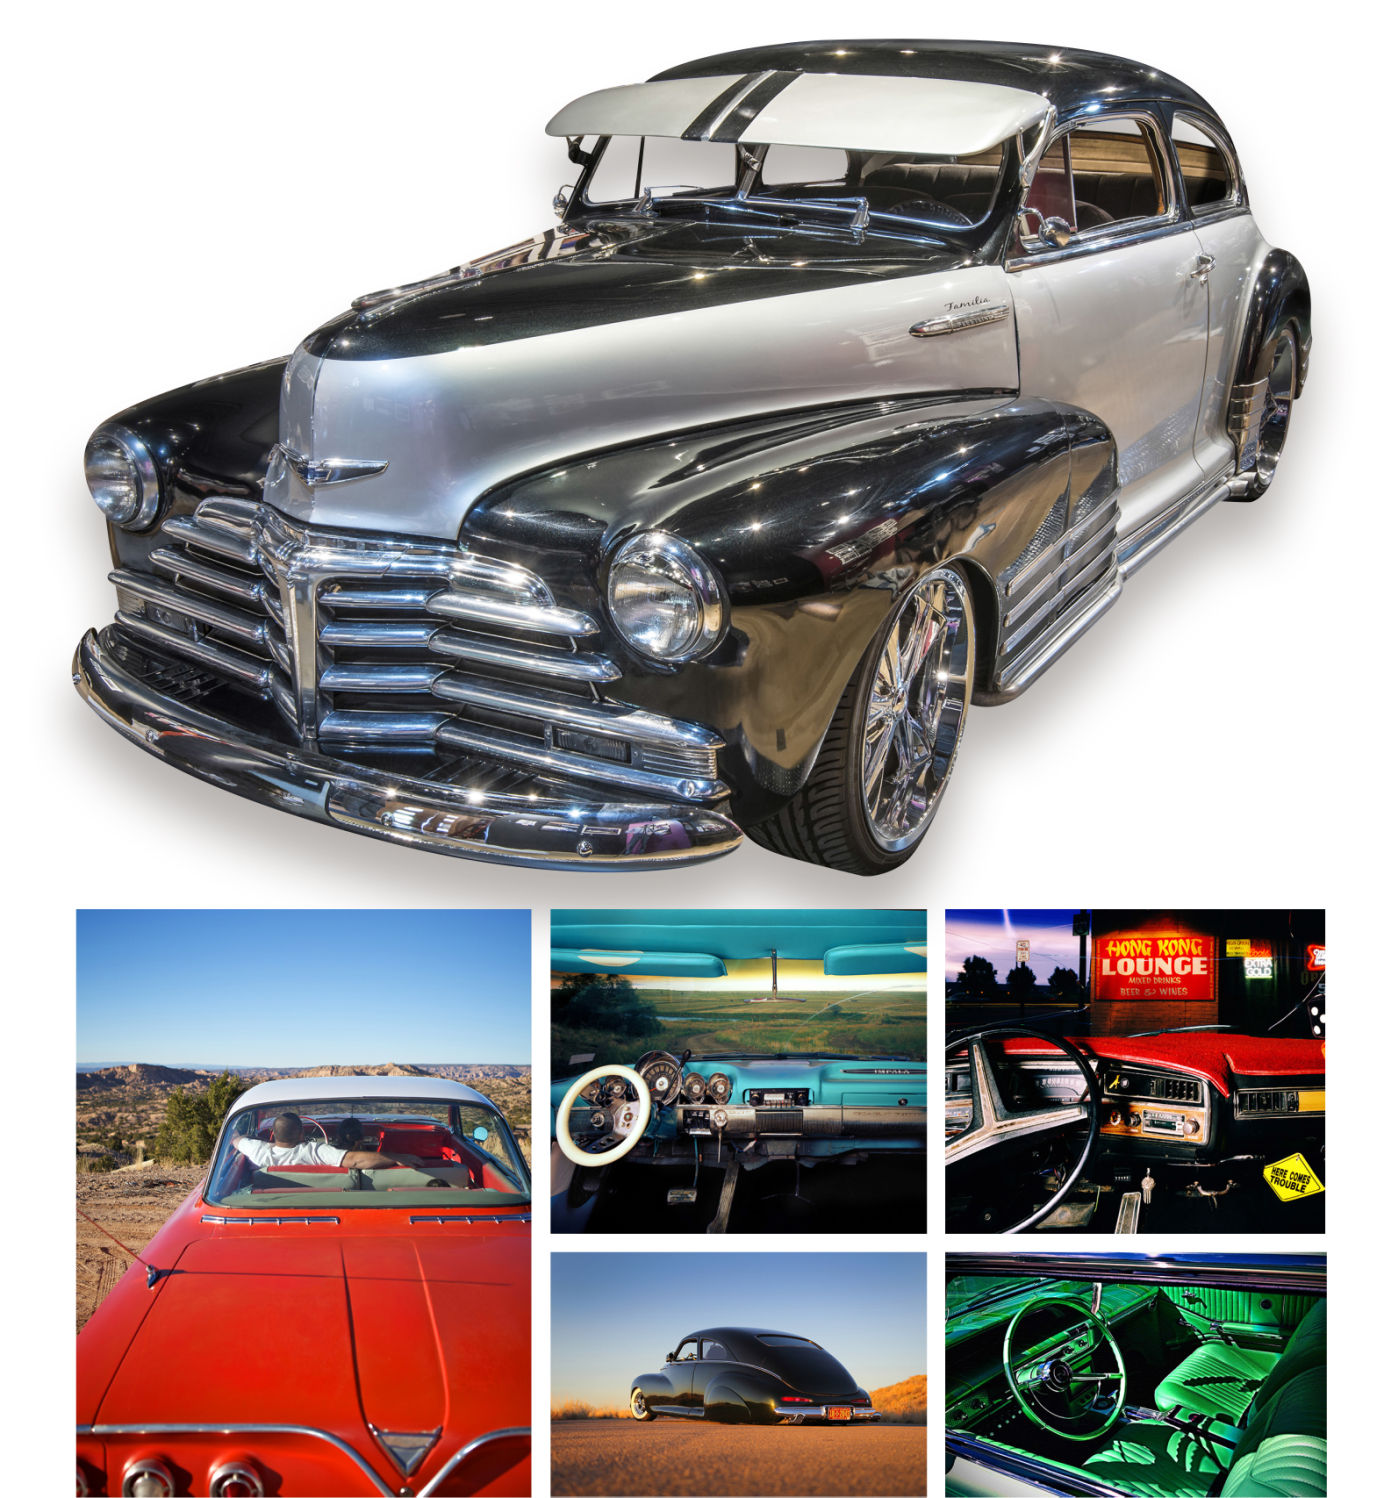 Take a little trip: A cruise through lowrider history in New